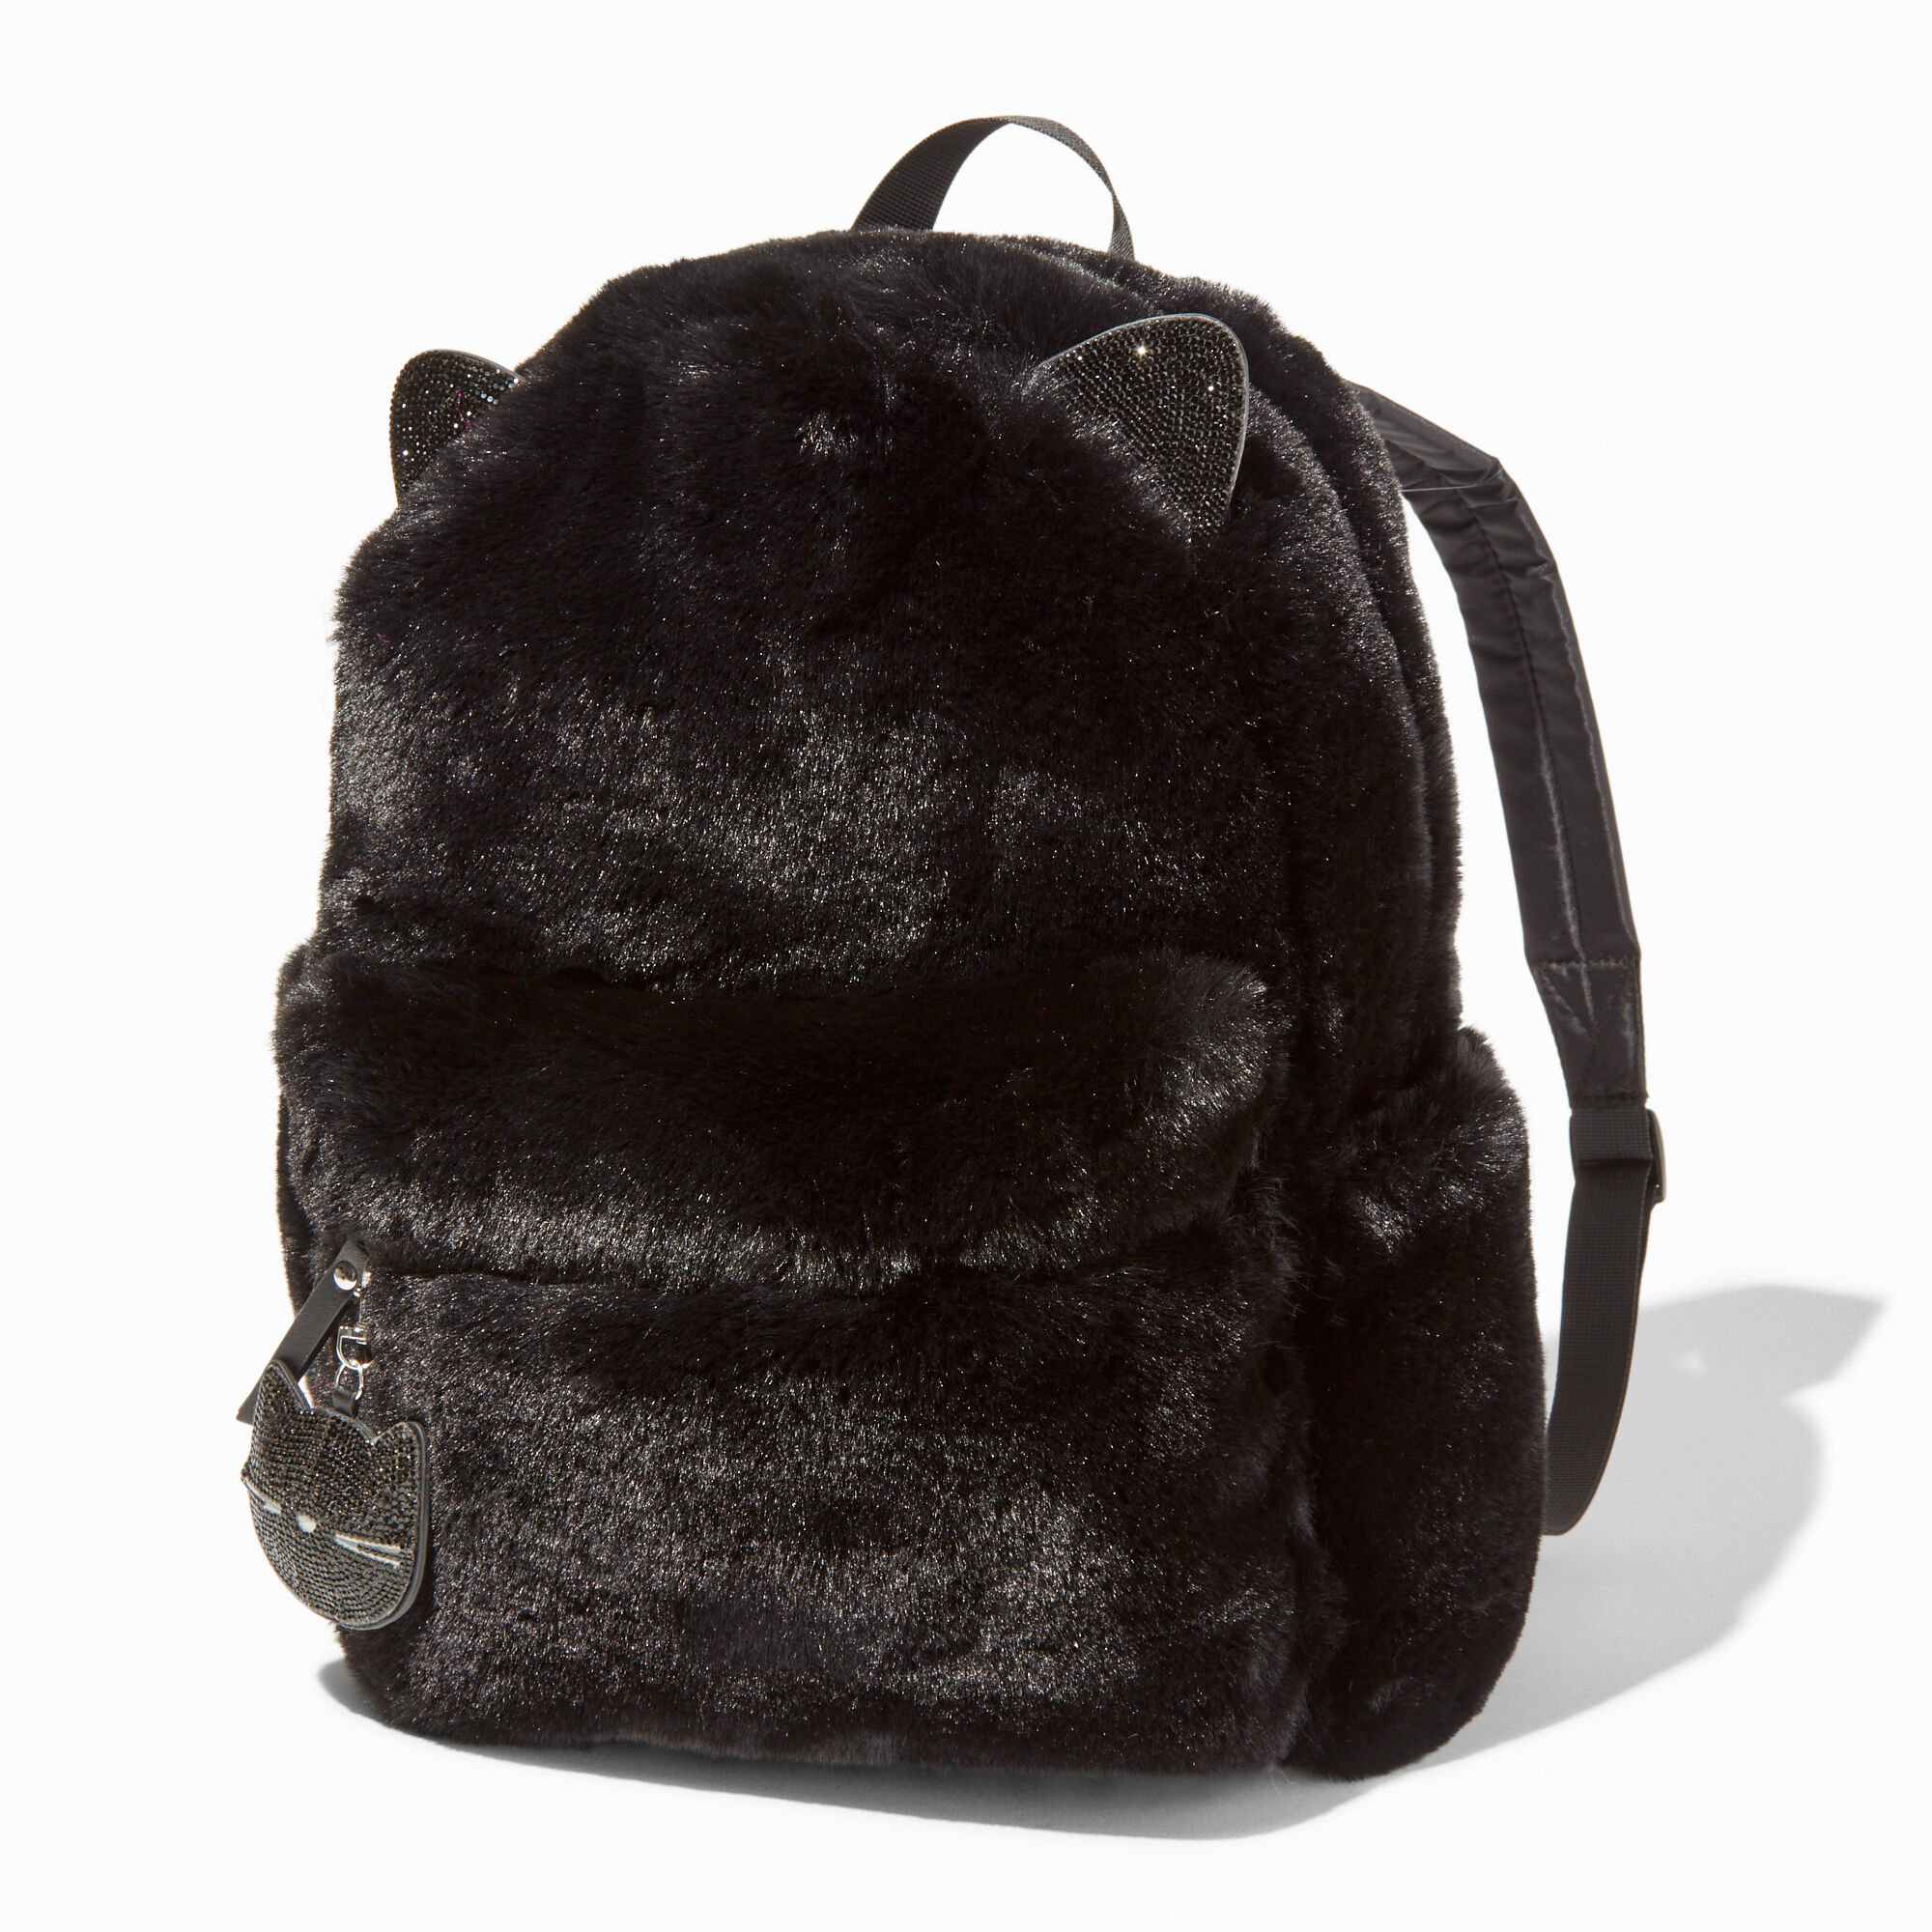 View Claires Cat Furry Backpack Black information